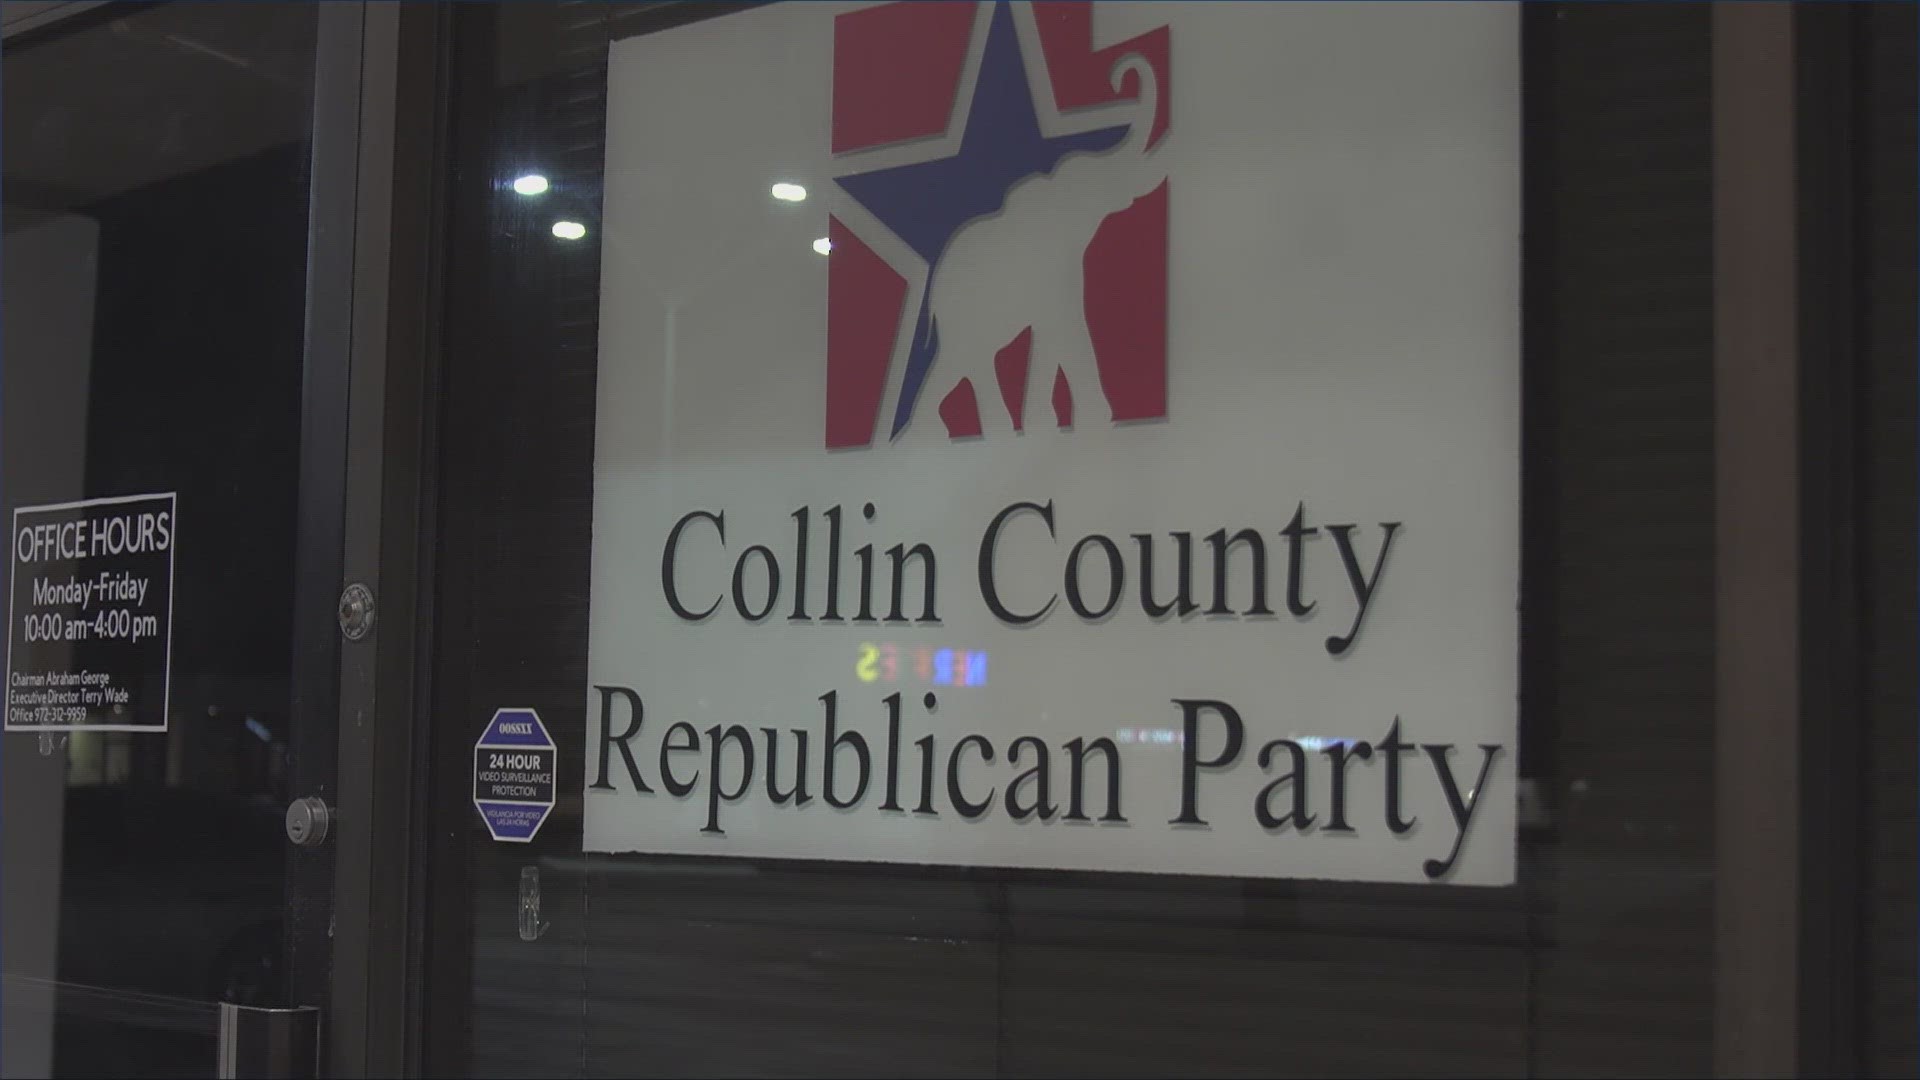 The Collin County Republican Party leader said there is frustration with the five county House members who voted for the articles of impeachment.